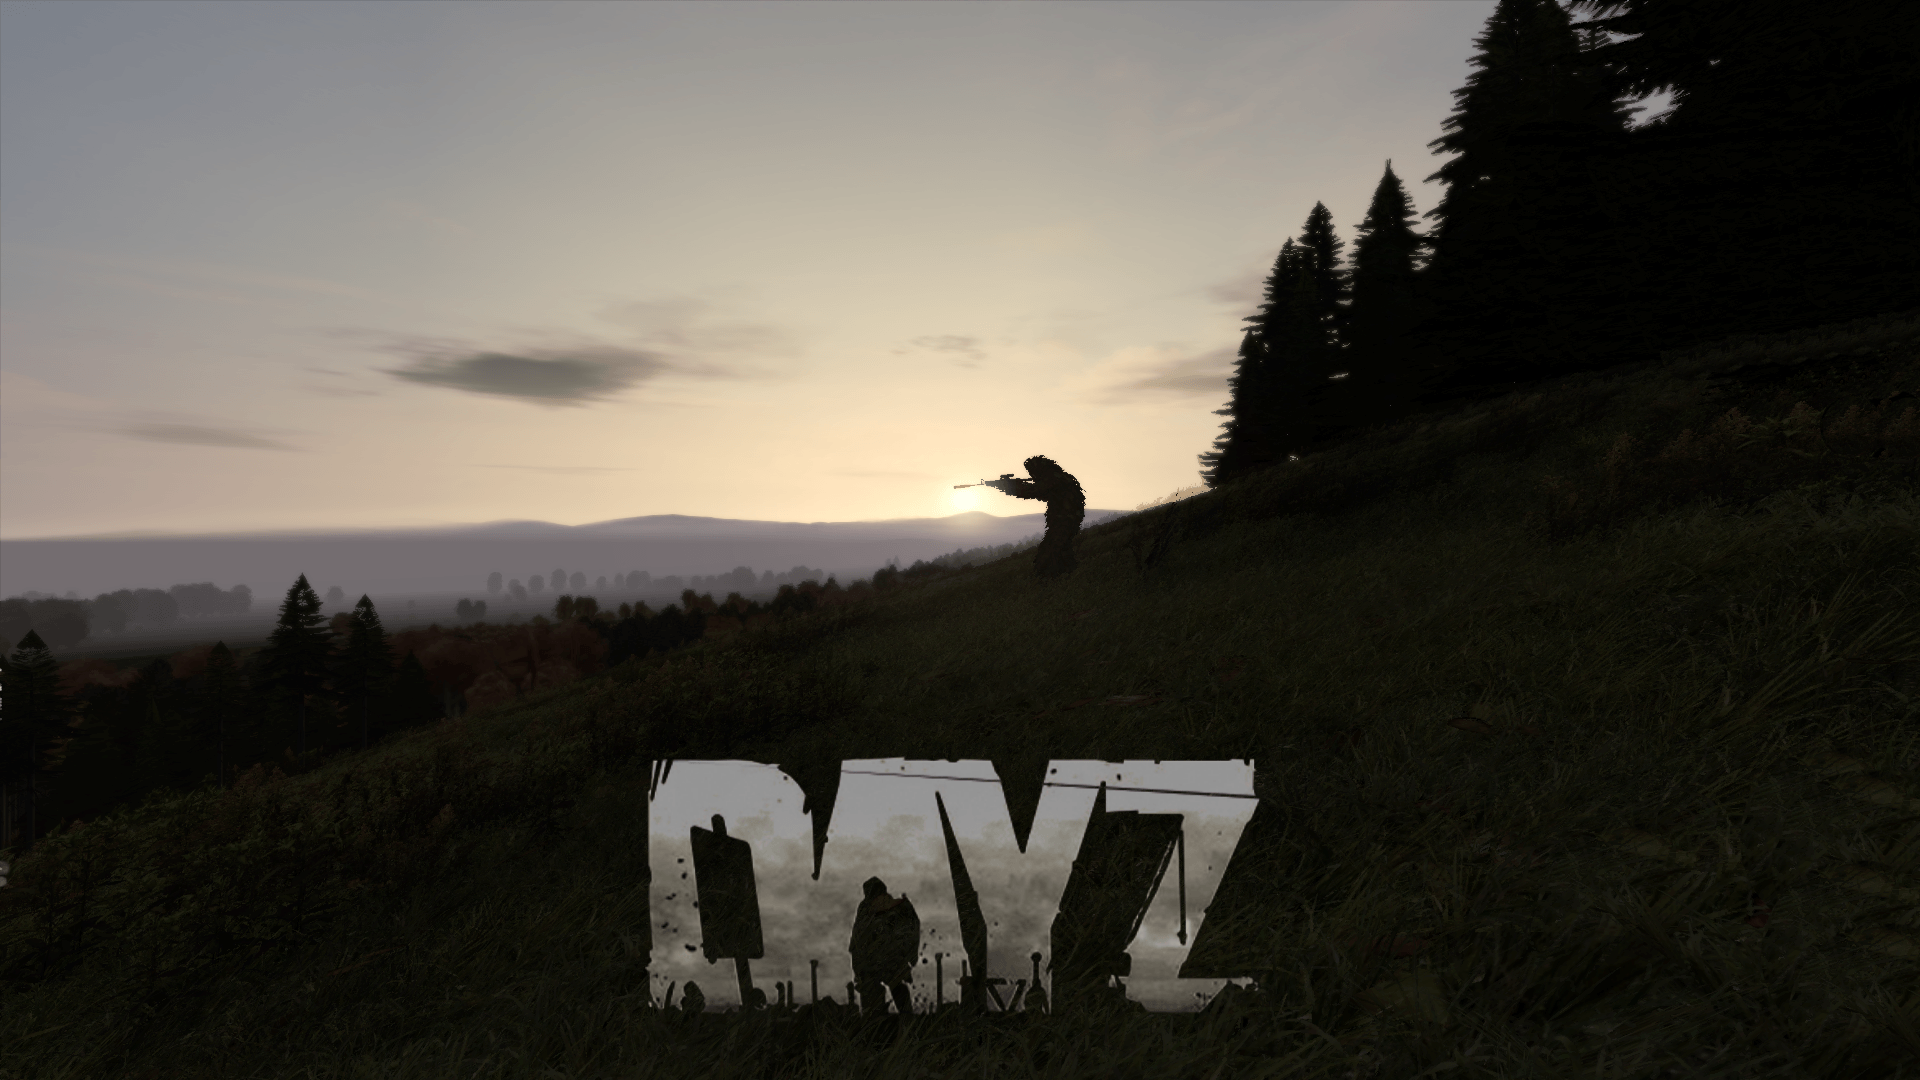 iphone xs max dayz epoch mod wallpapers